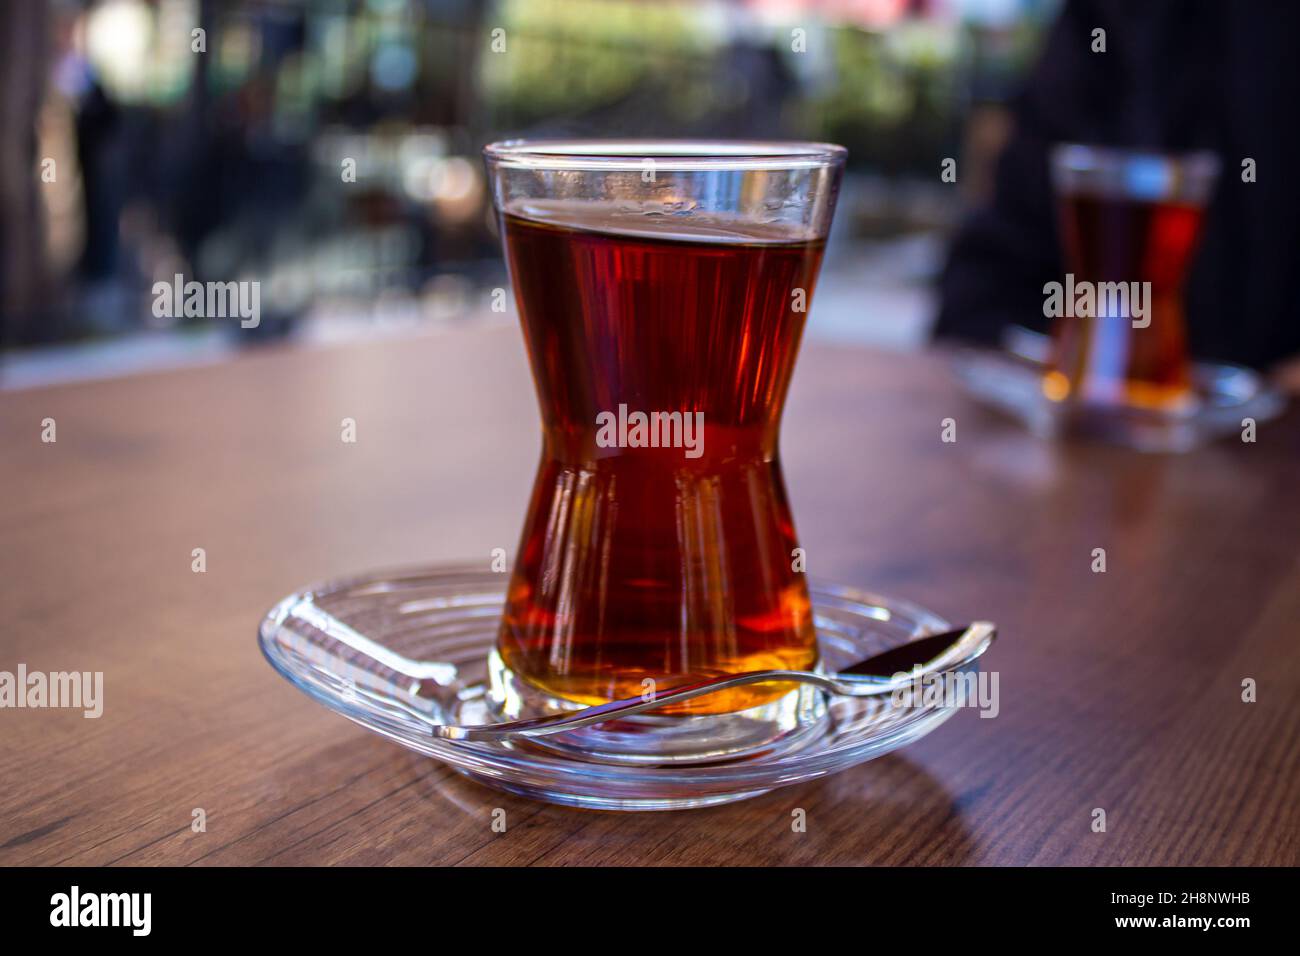 Turkish tea in glass, traditional Turkish tea on wooden table in a cafe. Stock Photo